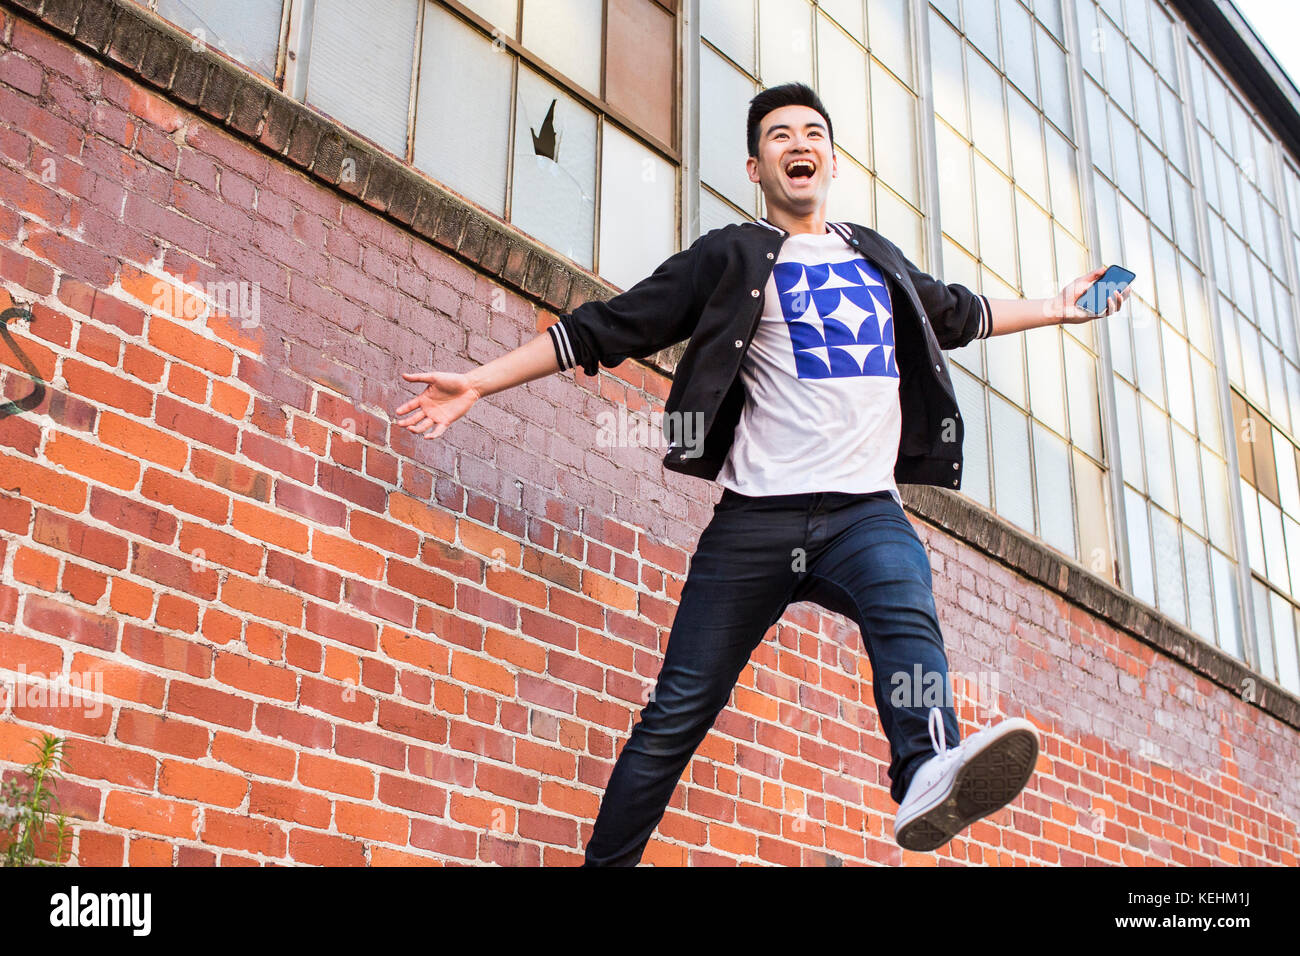 Chinese man jumping for joy near brick wall holding cell phone Stock Photo